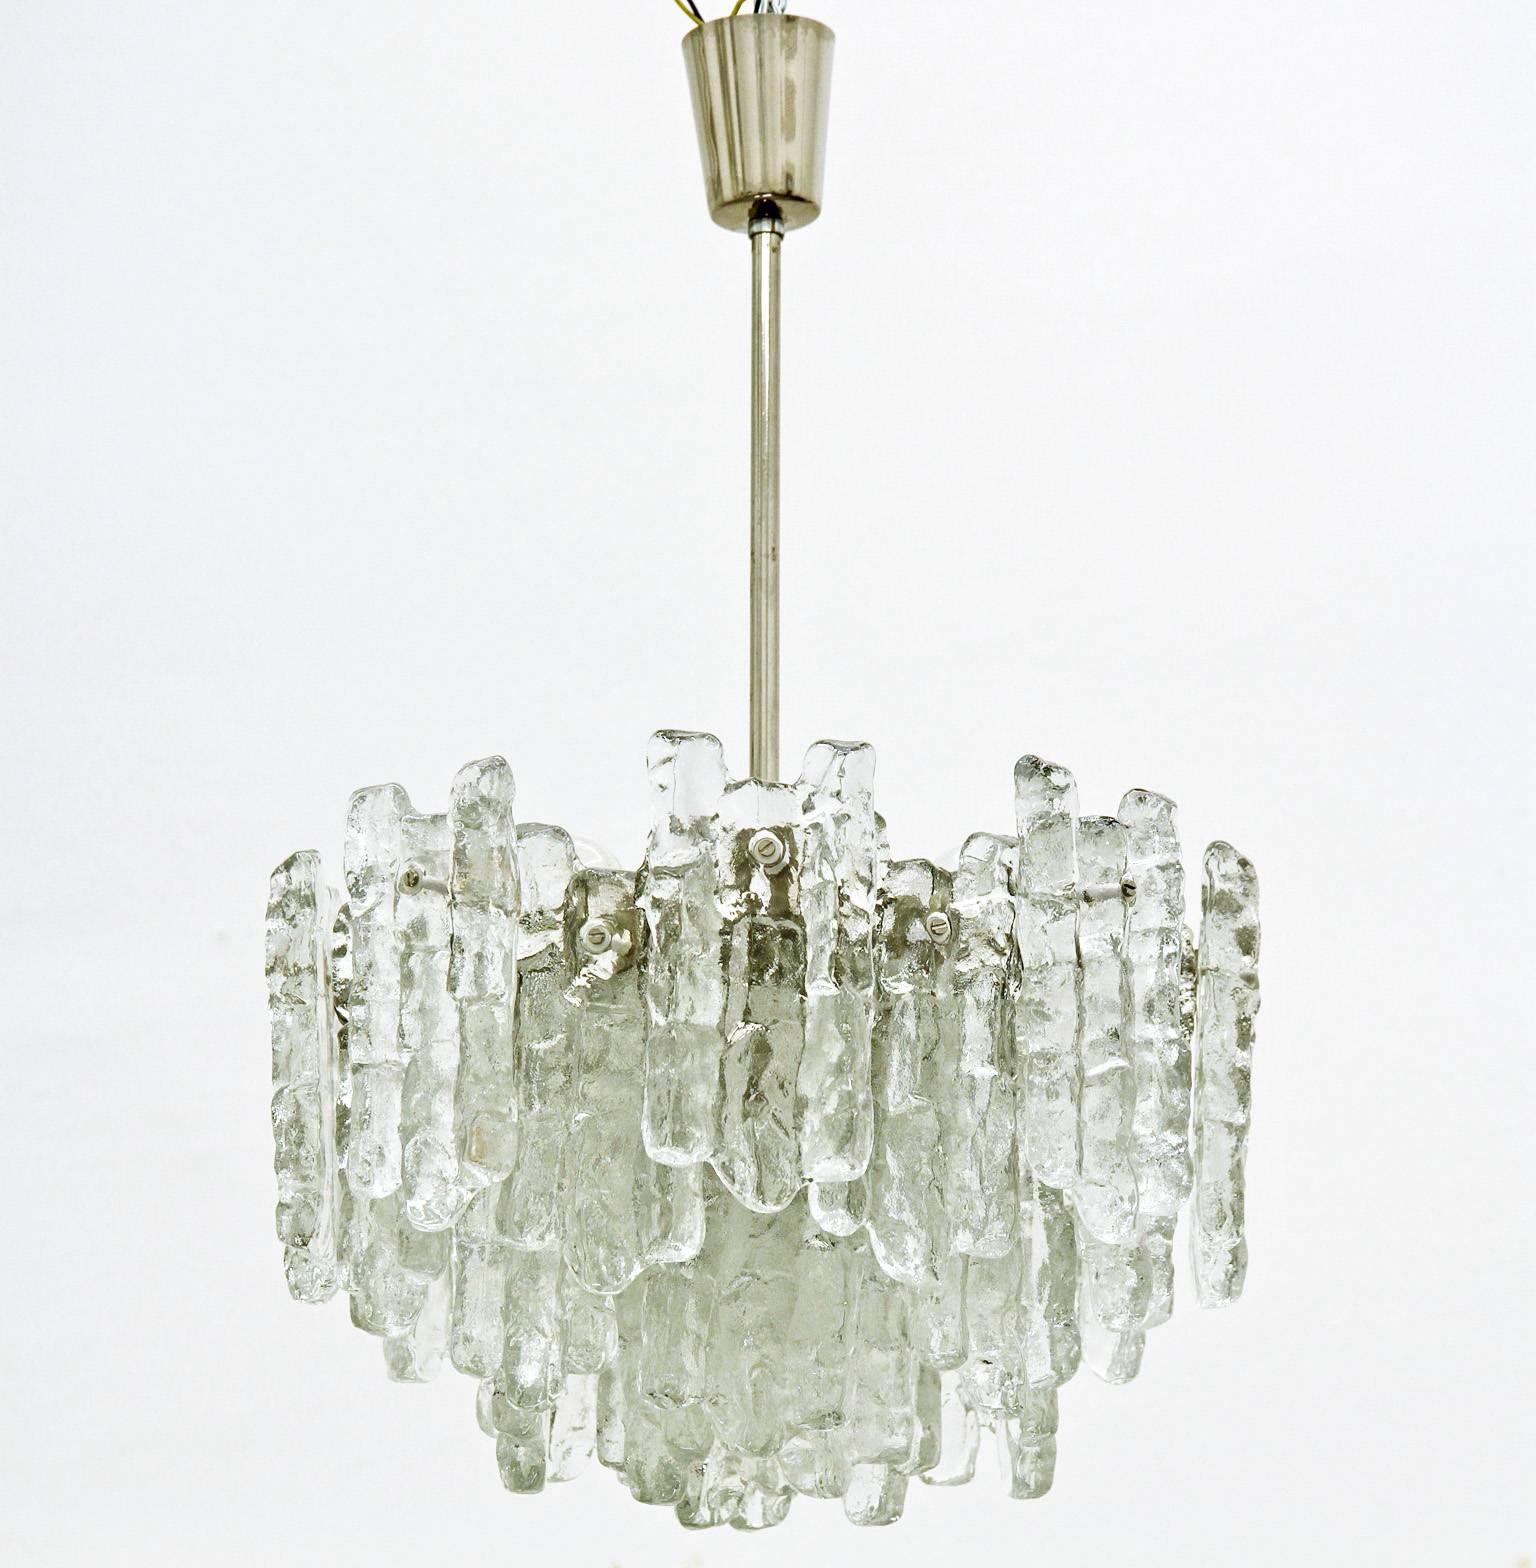 Dramatic ice glass chandelier by Kalmar, Vienna. 28 icicle shaped glass pieces are arranged in three-tiers and lit by nine-light to create a stunning light.